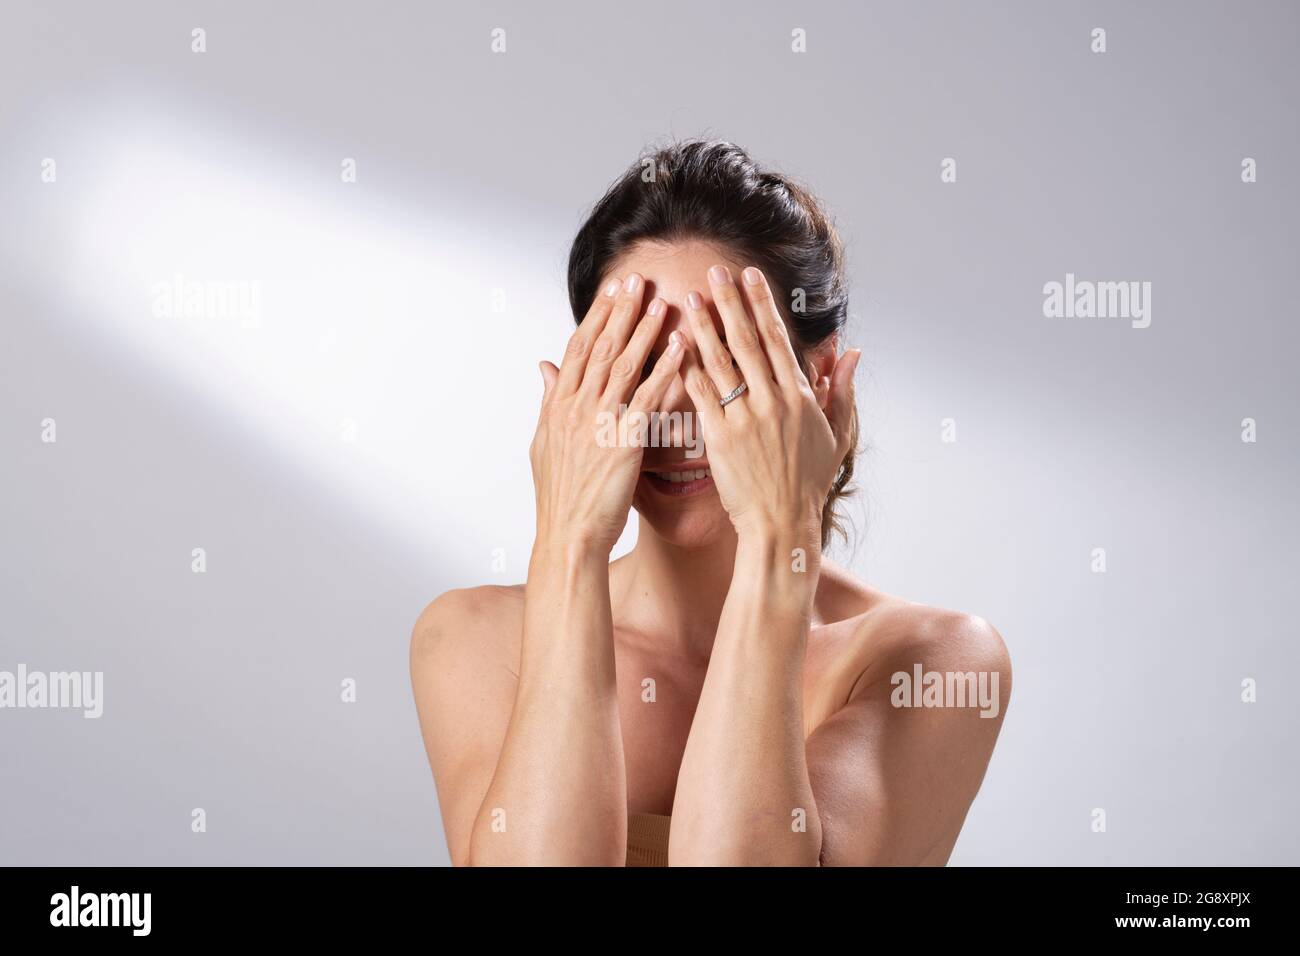 A woman's skincare regime. Hands and fingers on face and gently massage. Stock Photo